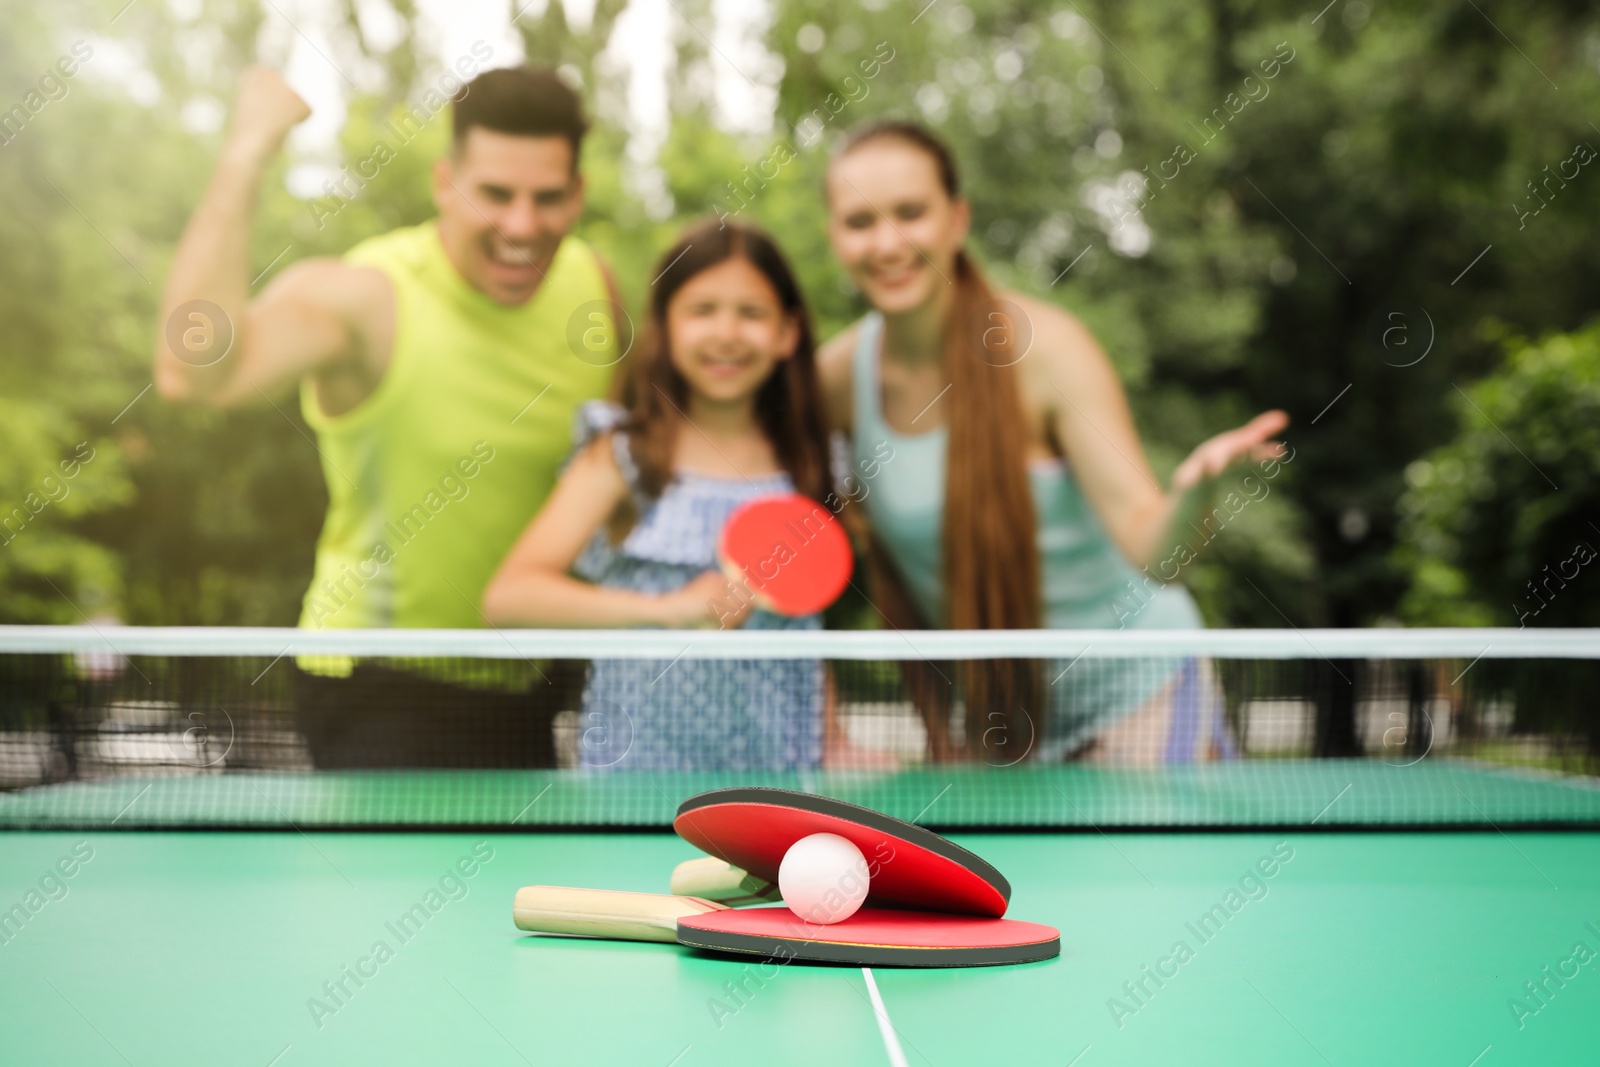 Photo of Family near ping pong table in park, focus on rackets and ball